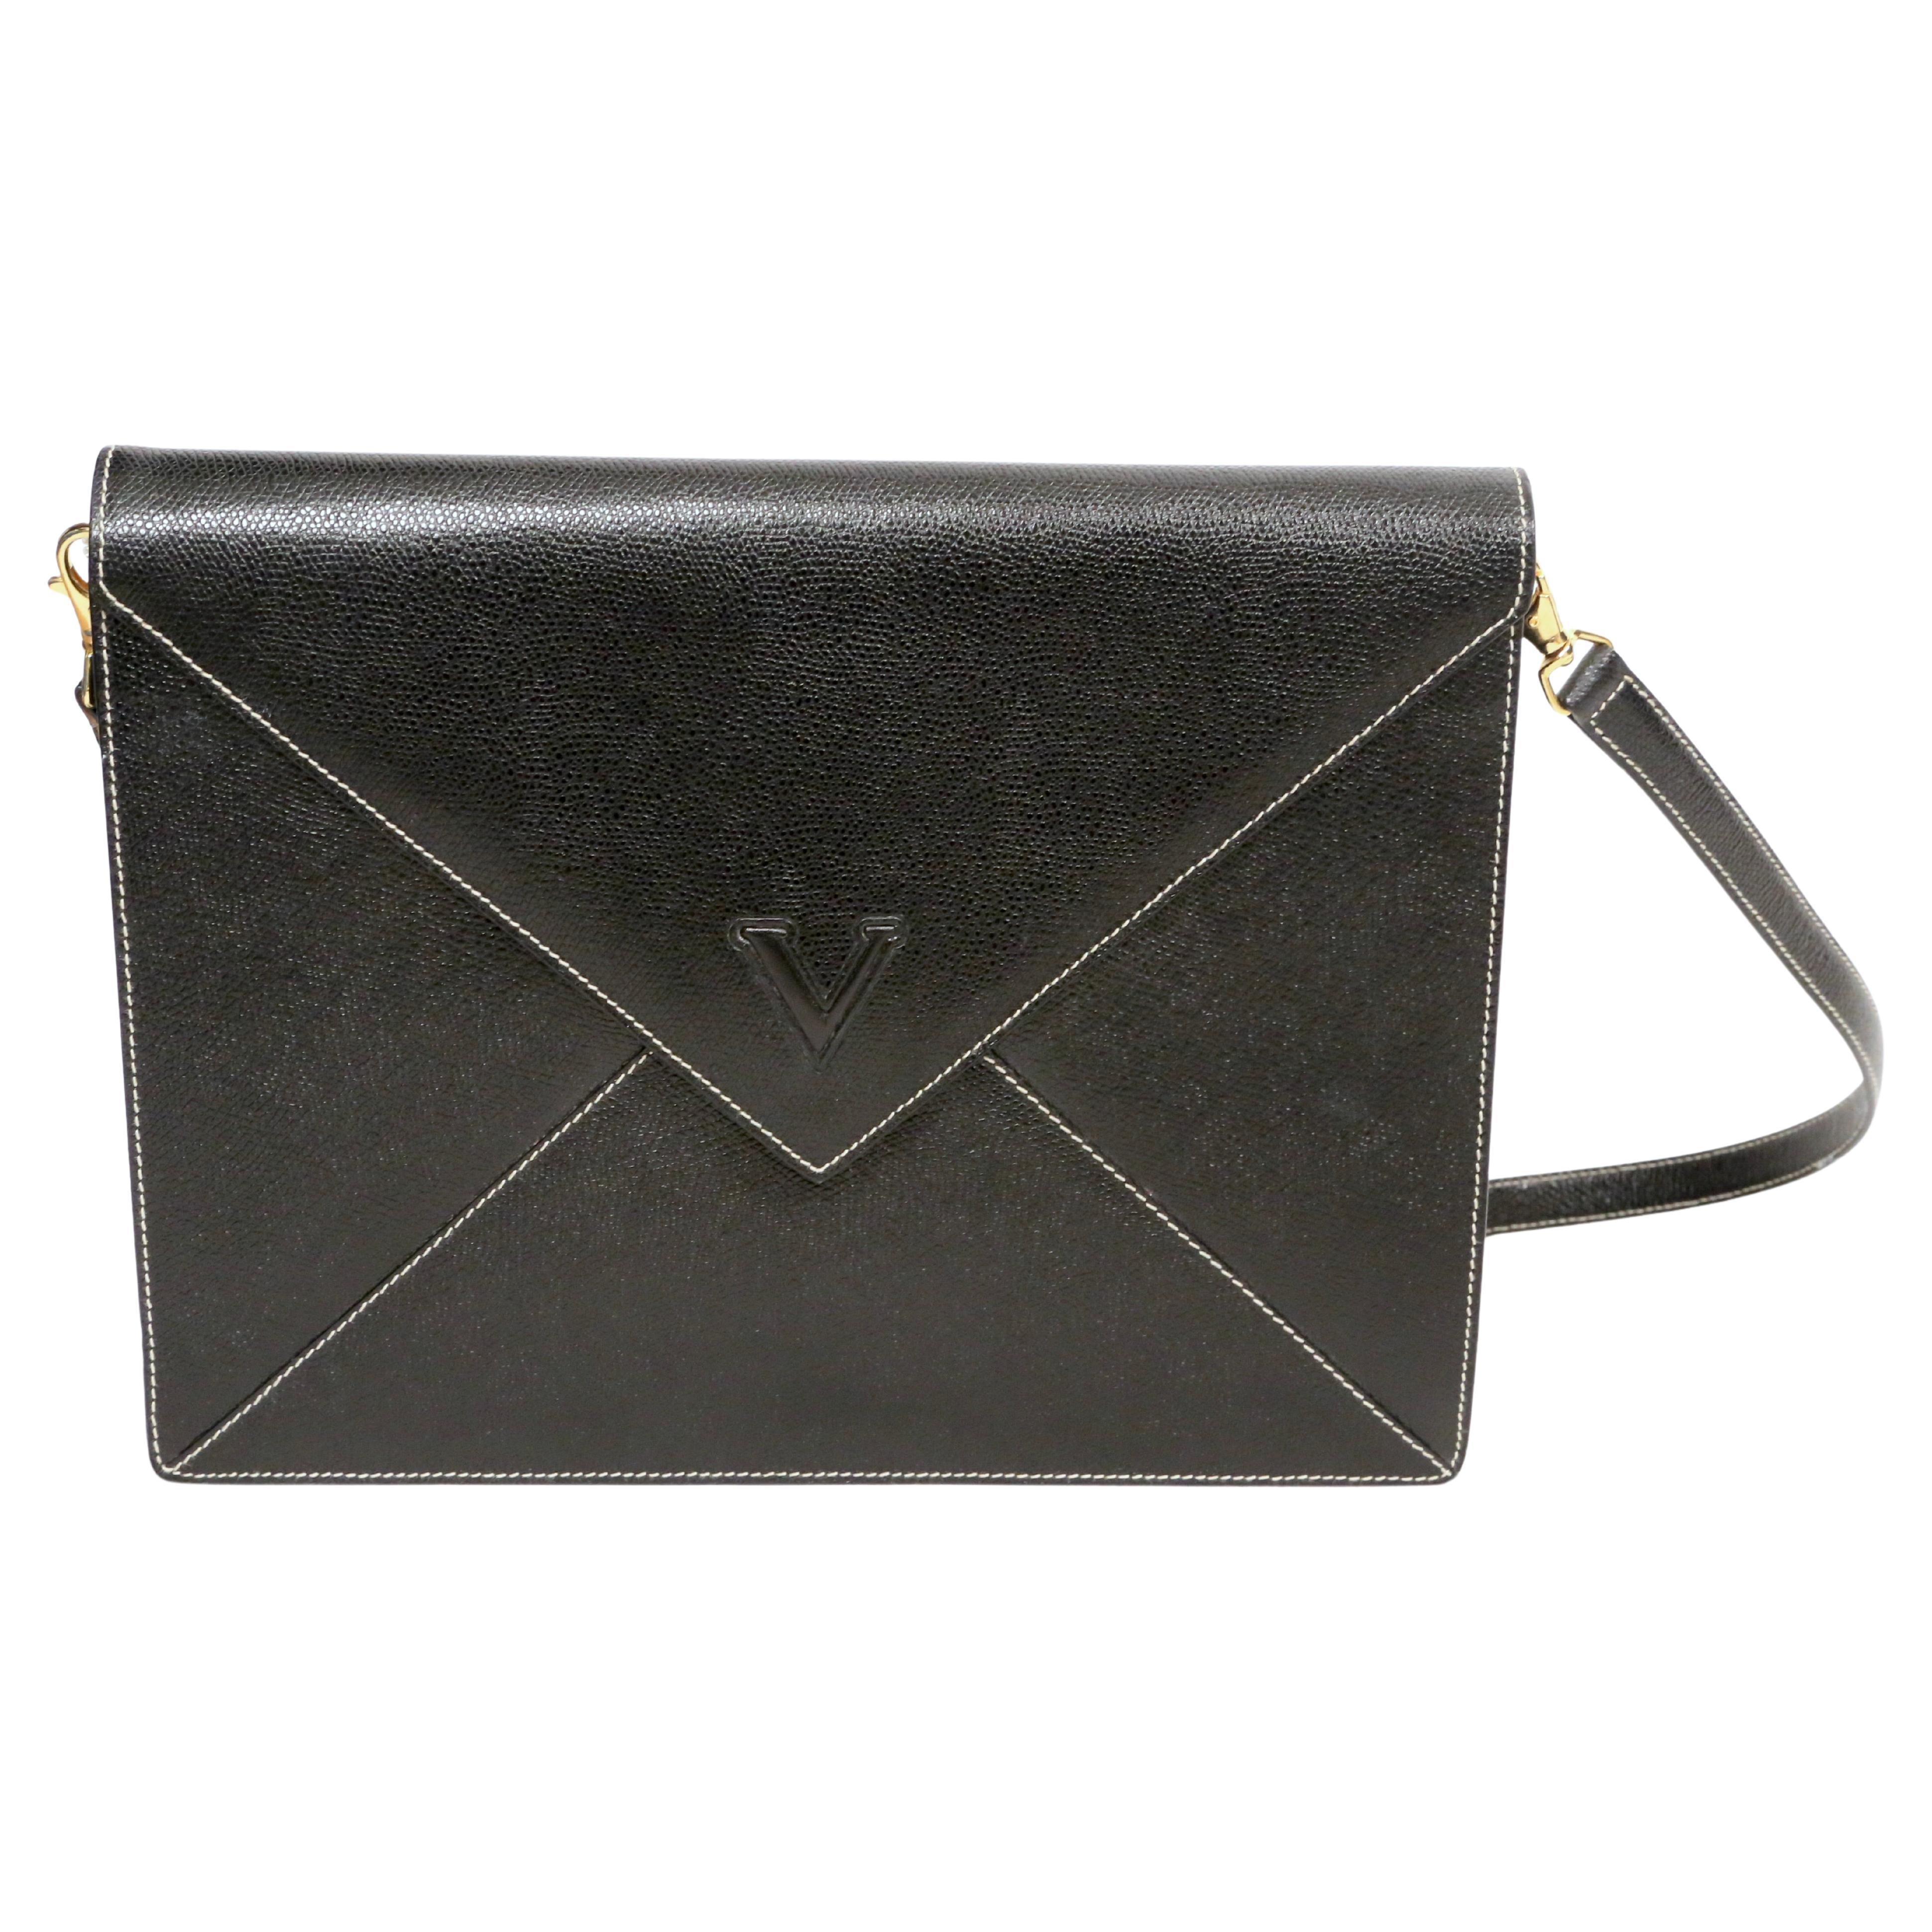 Black textured leather convertible bag in the shape of an envelope designed by Valentino dating to the 1990's. Strap is completely removable. Gold hardware. Off-white top-stitching. Bag measures approximately 11.75